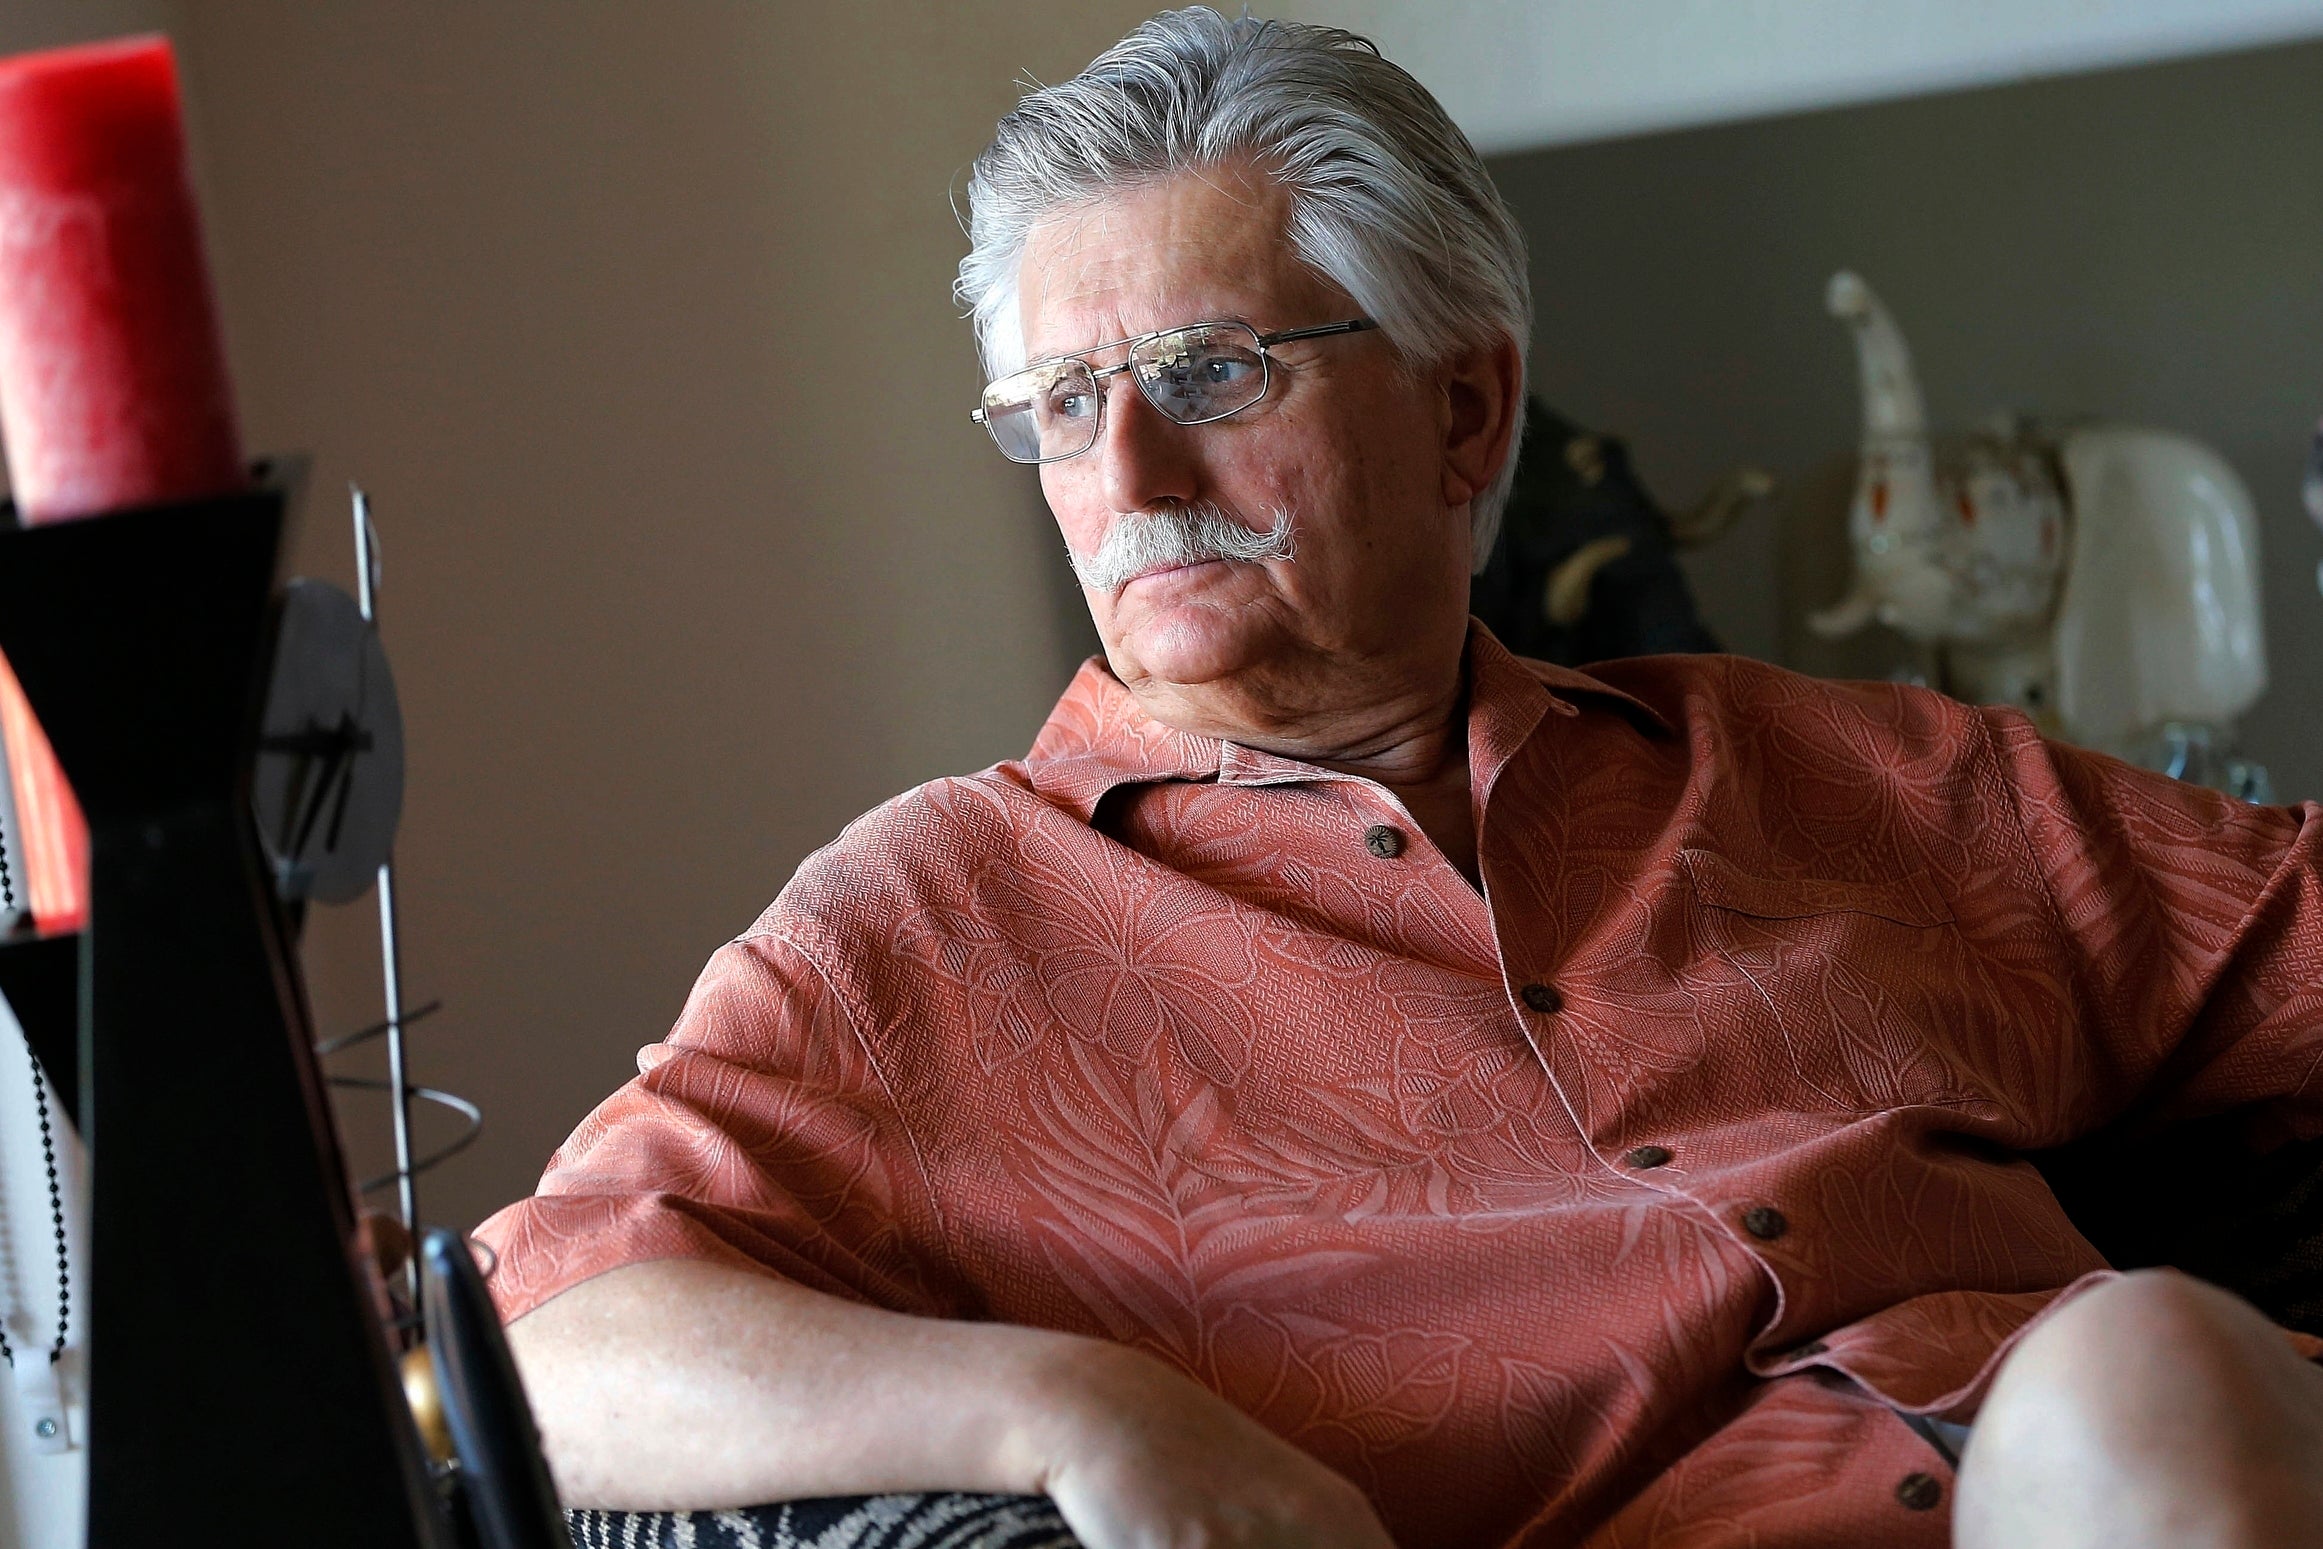 Goldman sits in his home in Peoria, Arizona, on May 20, 2014. He is now demanding $117 million from Simpson’s estate